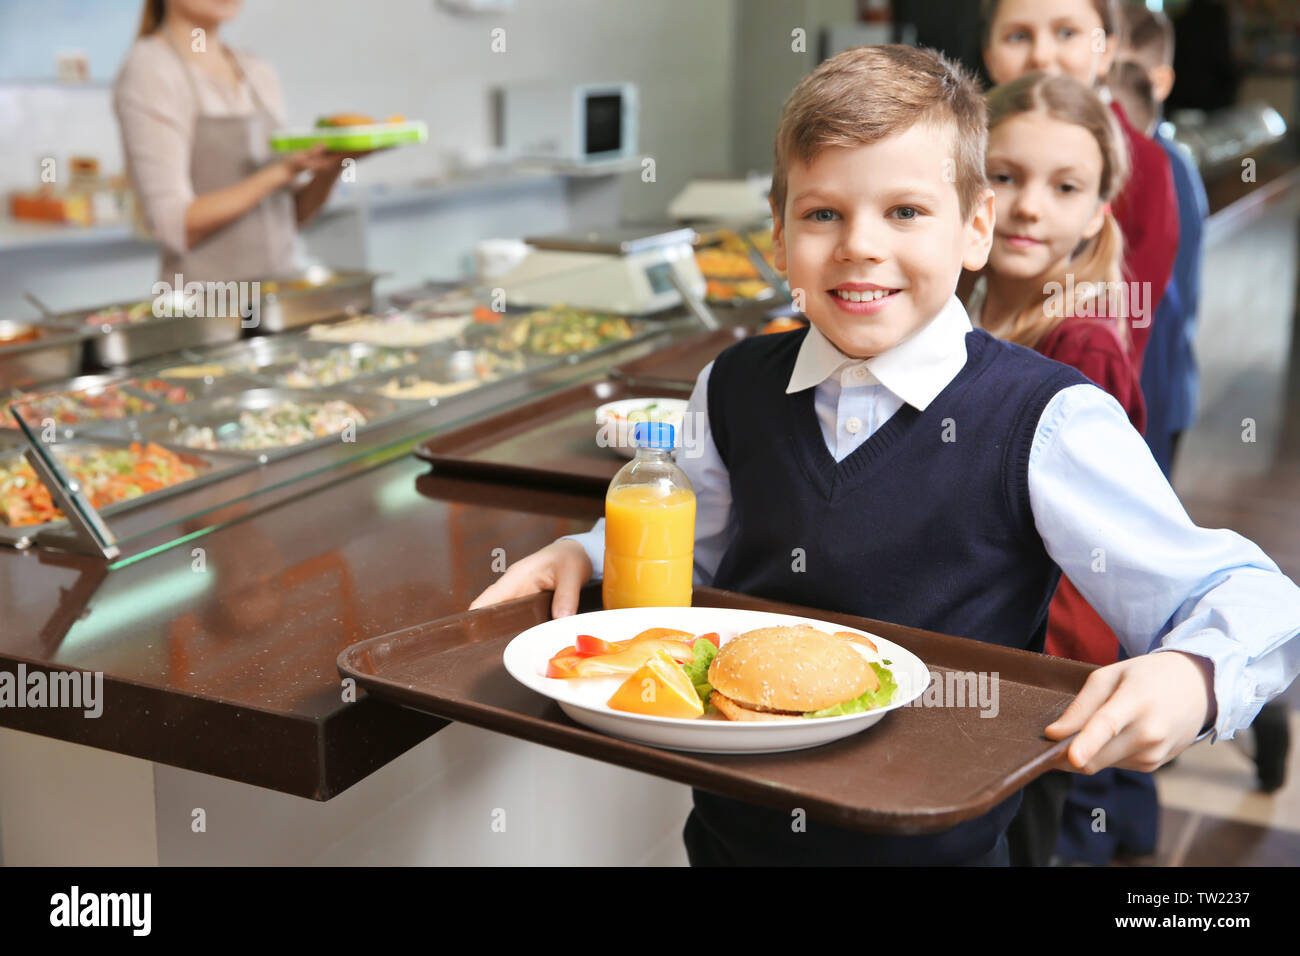 https://c8.alamy.com/comp/TW2237/cute-girl-holding-tray-with-delicious-food-in-school-cafeteria-TW2237.jpg